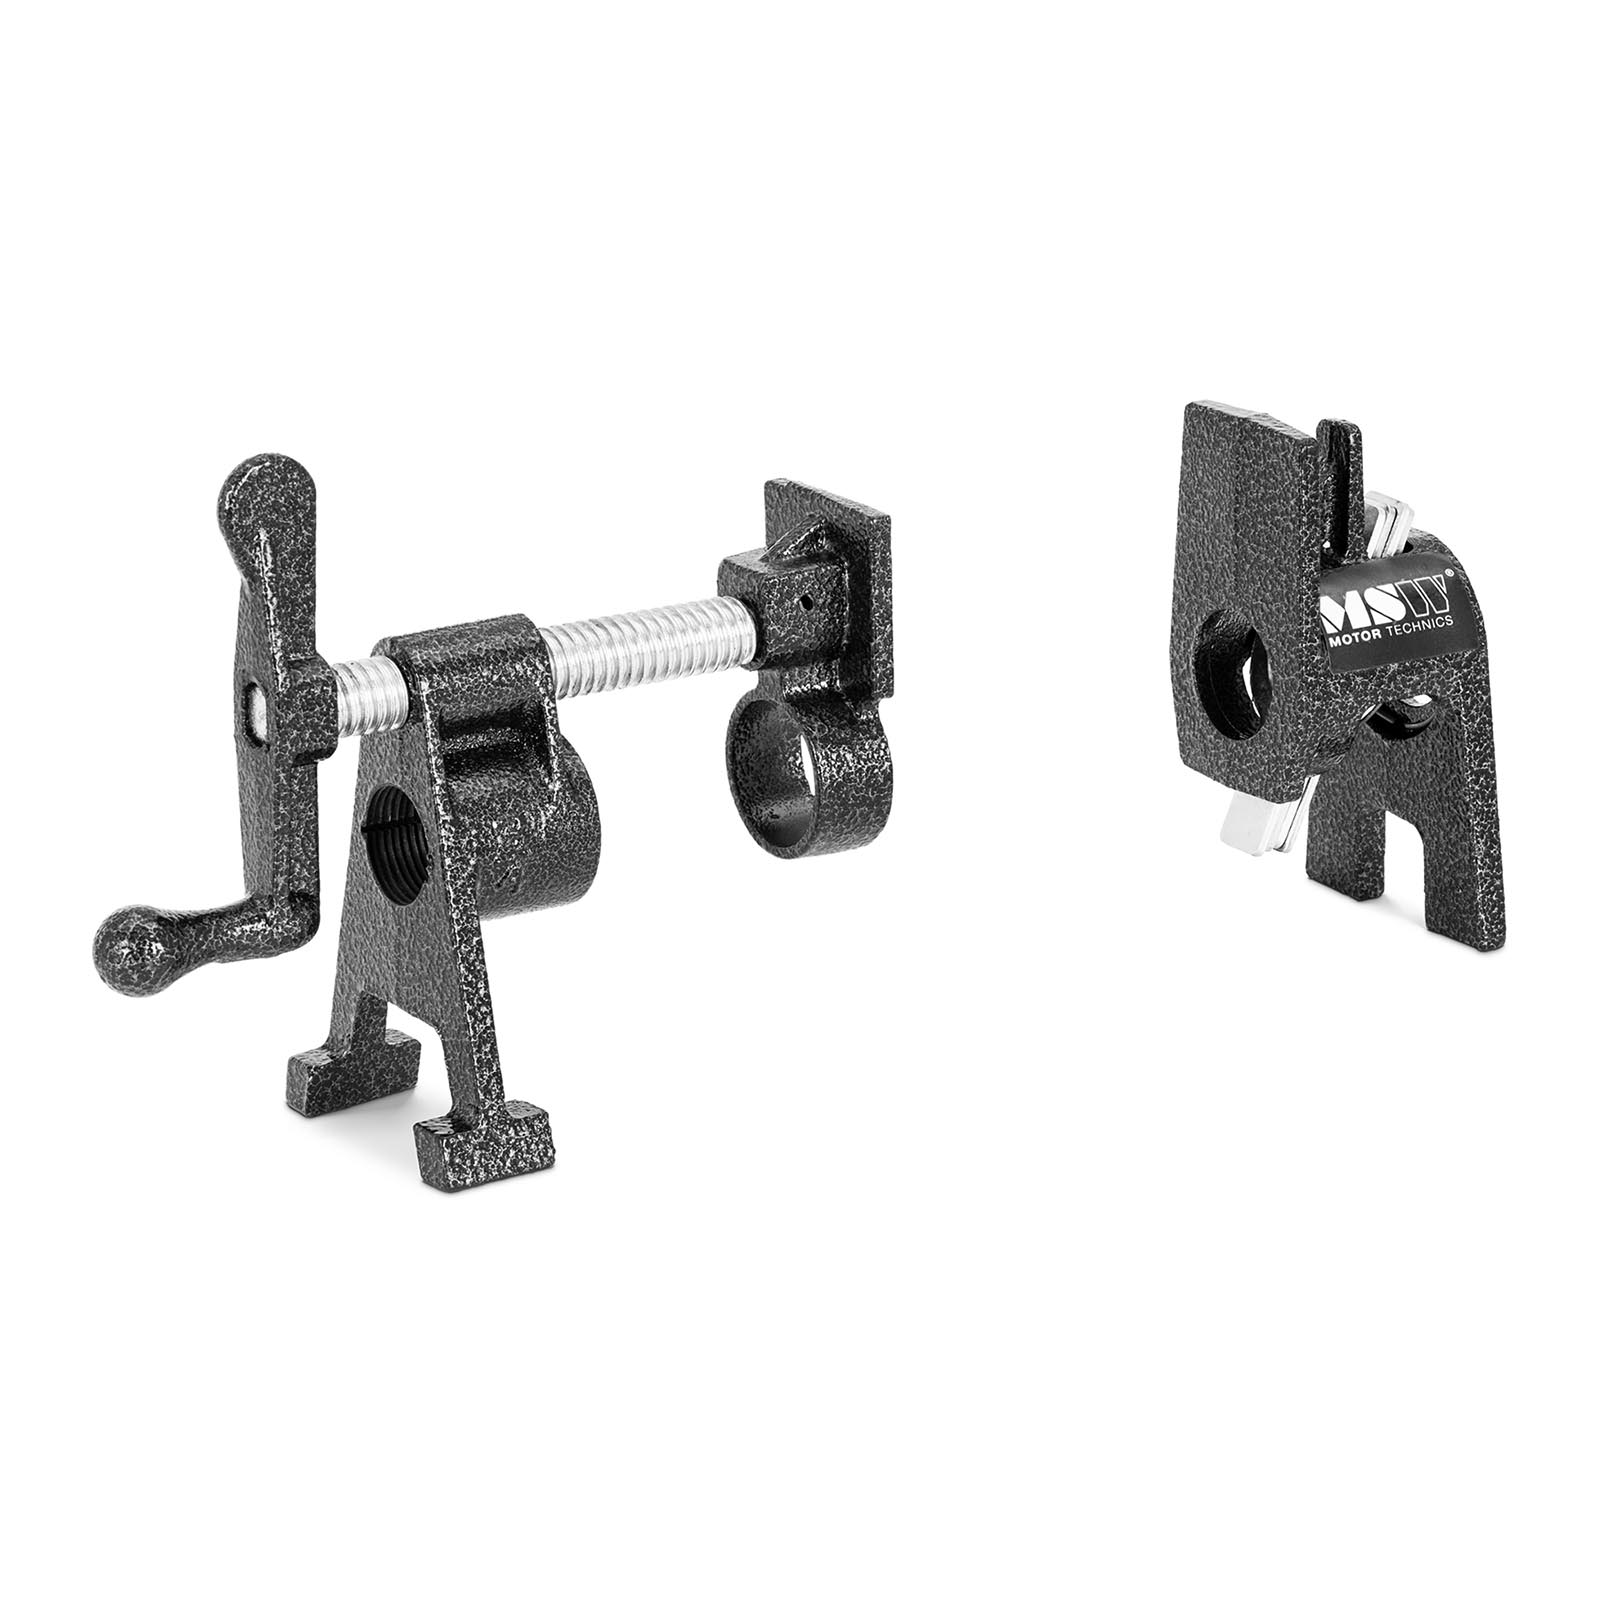 Pipe clamp - 25 mm / 1'' - with stand